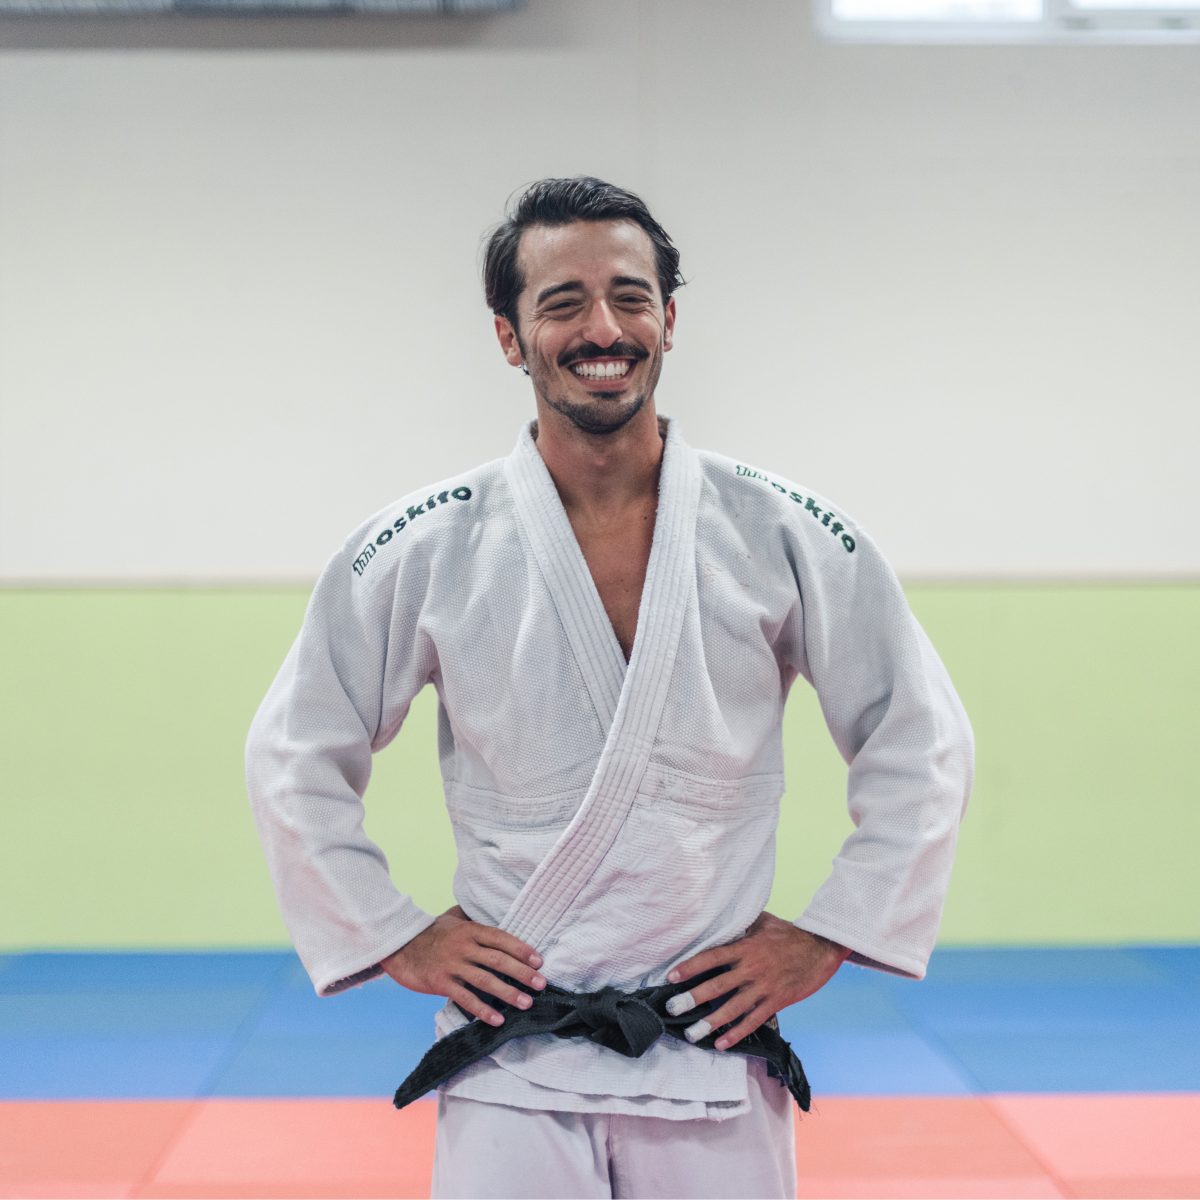 Matteo Cerutti a KISKA product management consultant after work at Judo